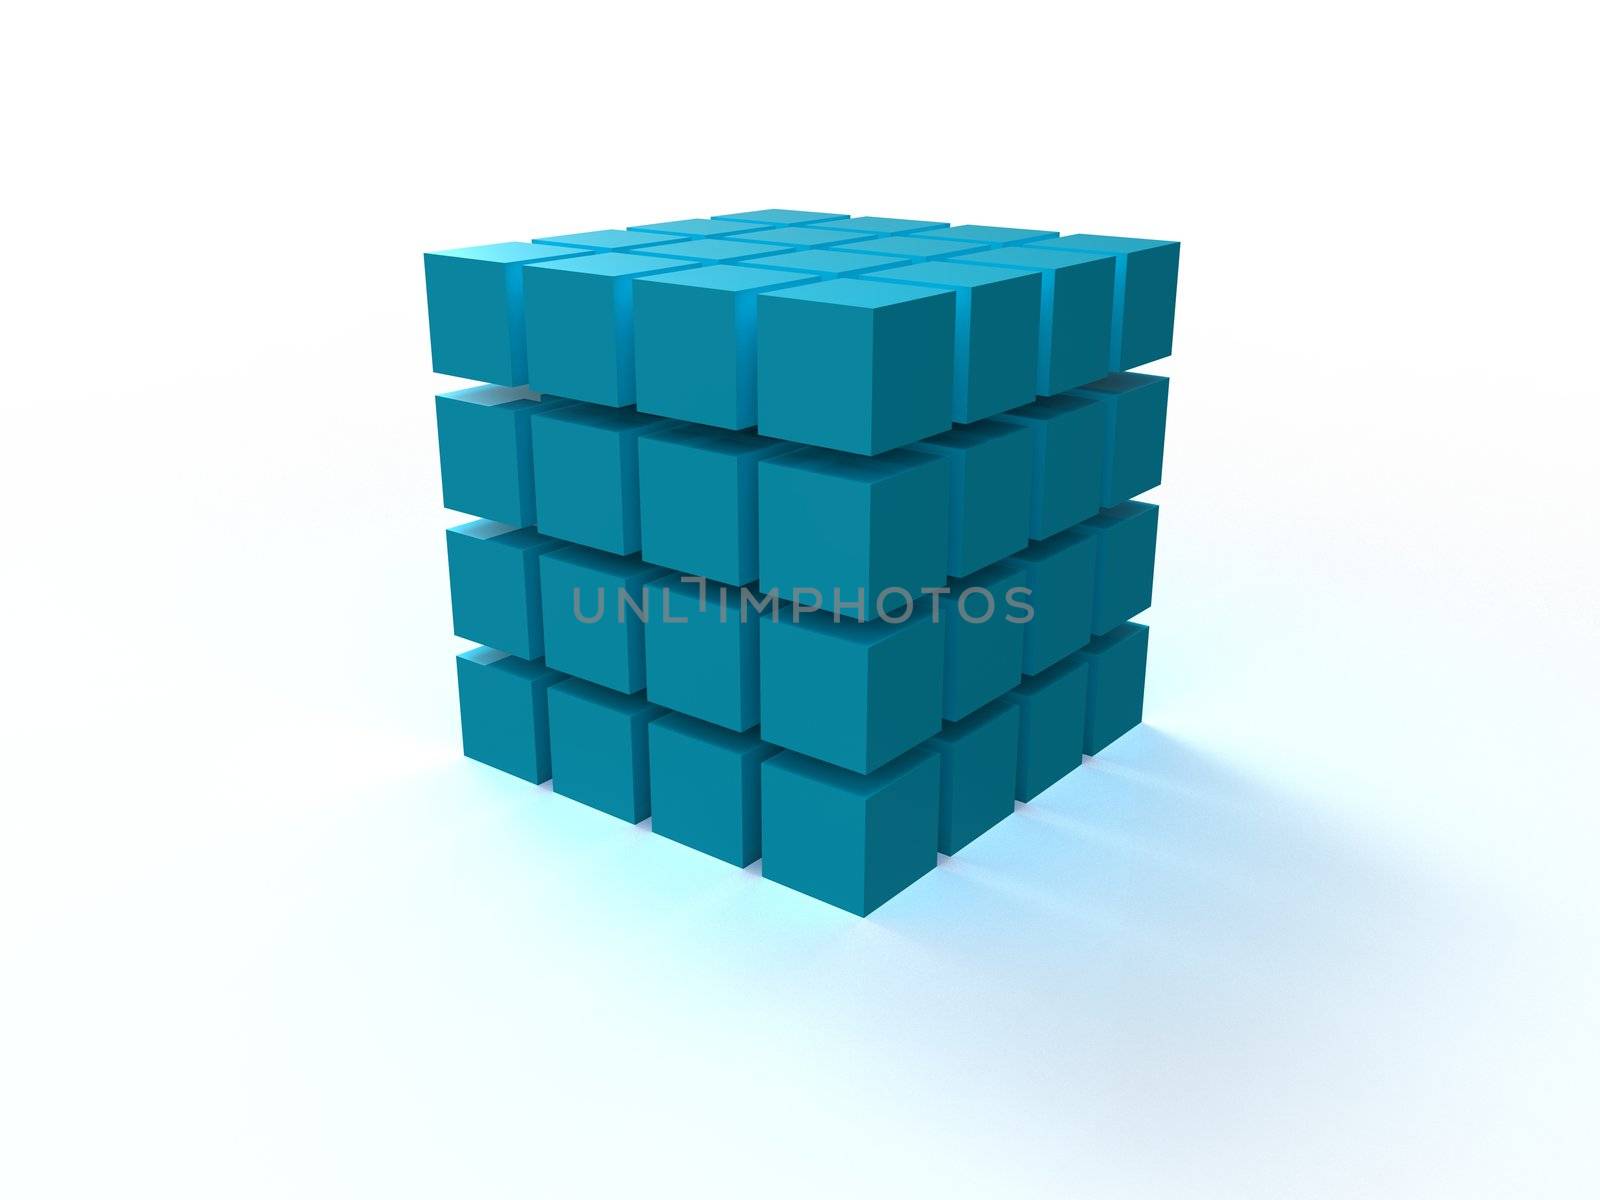 4x4 blue ordered cube assembling from blocks isolated on white background by vermicule